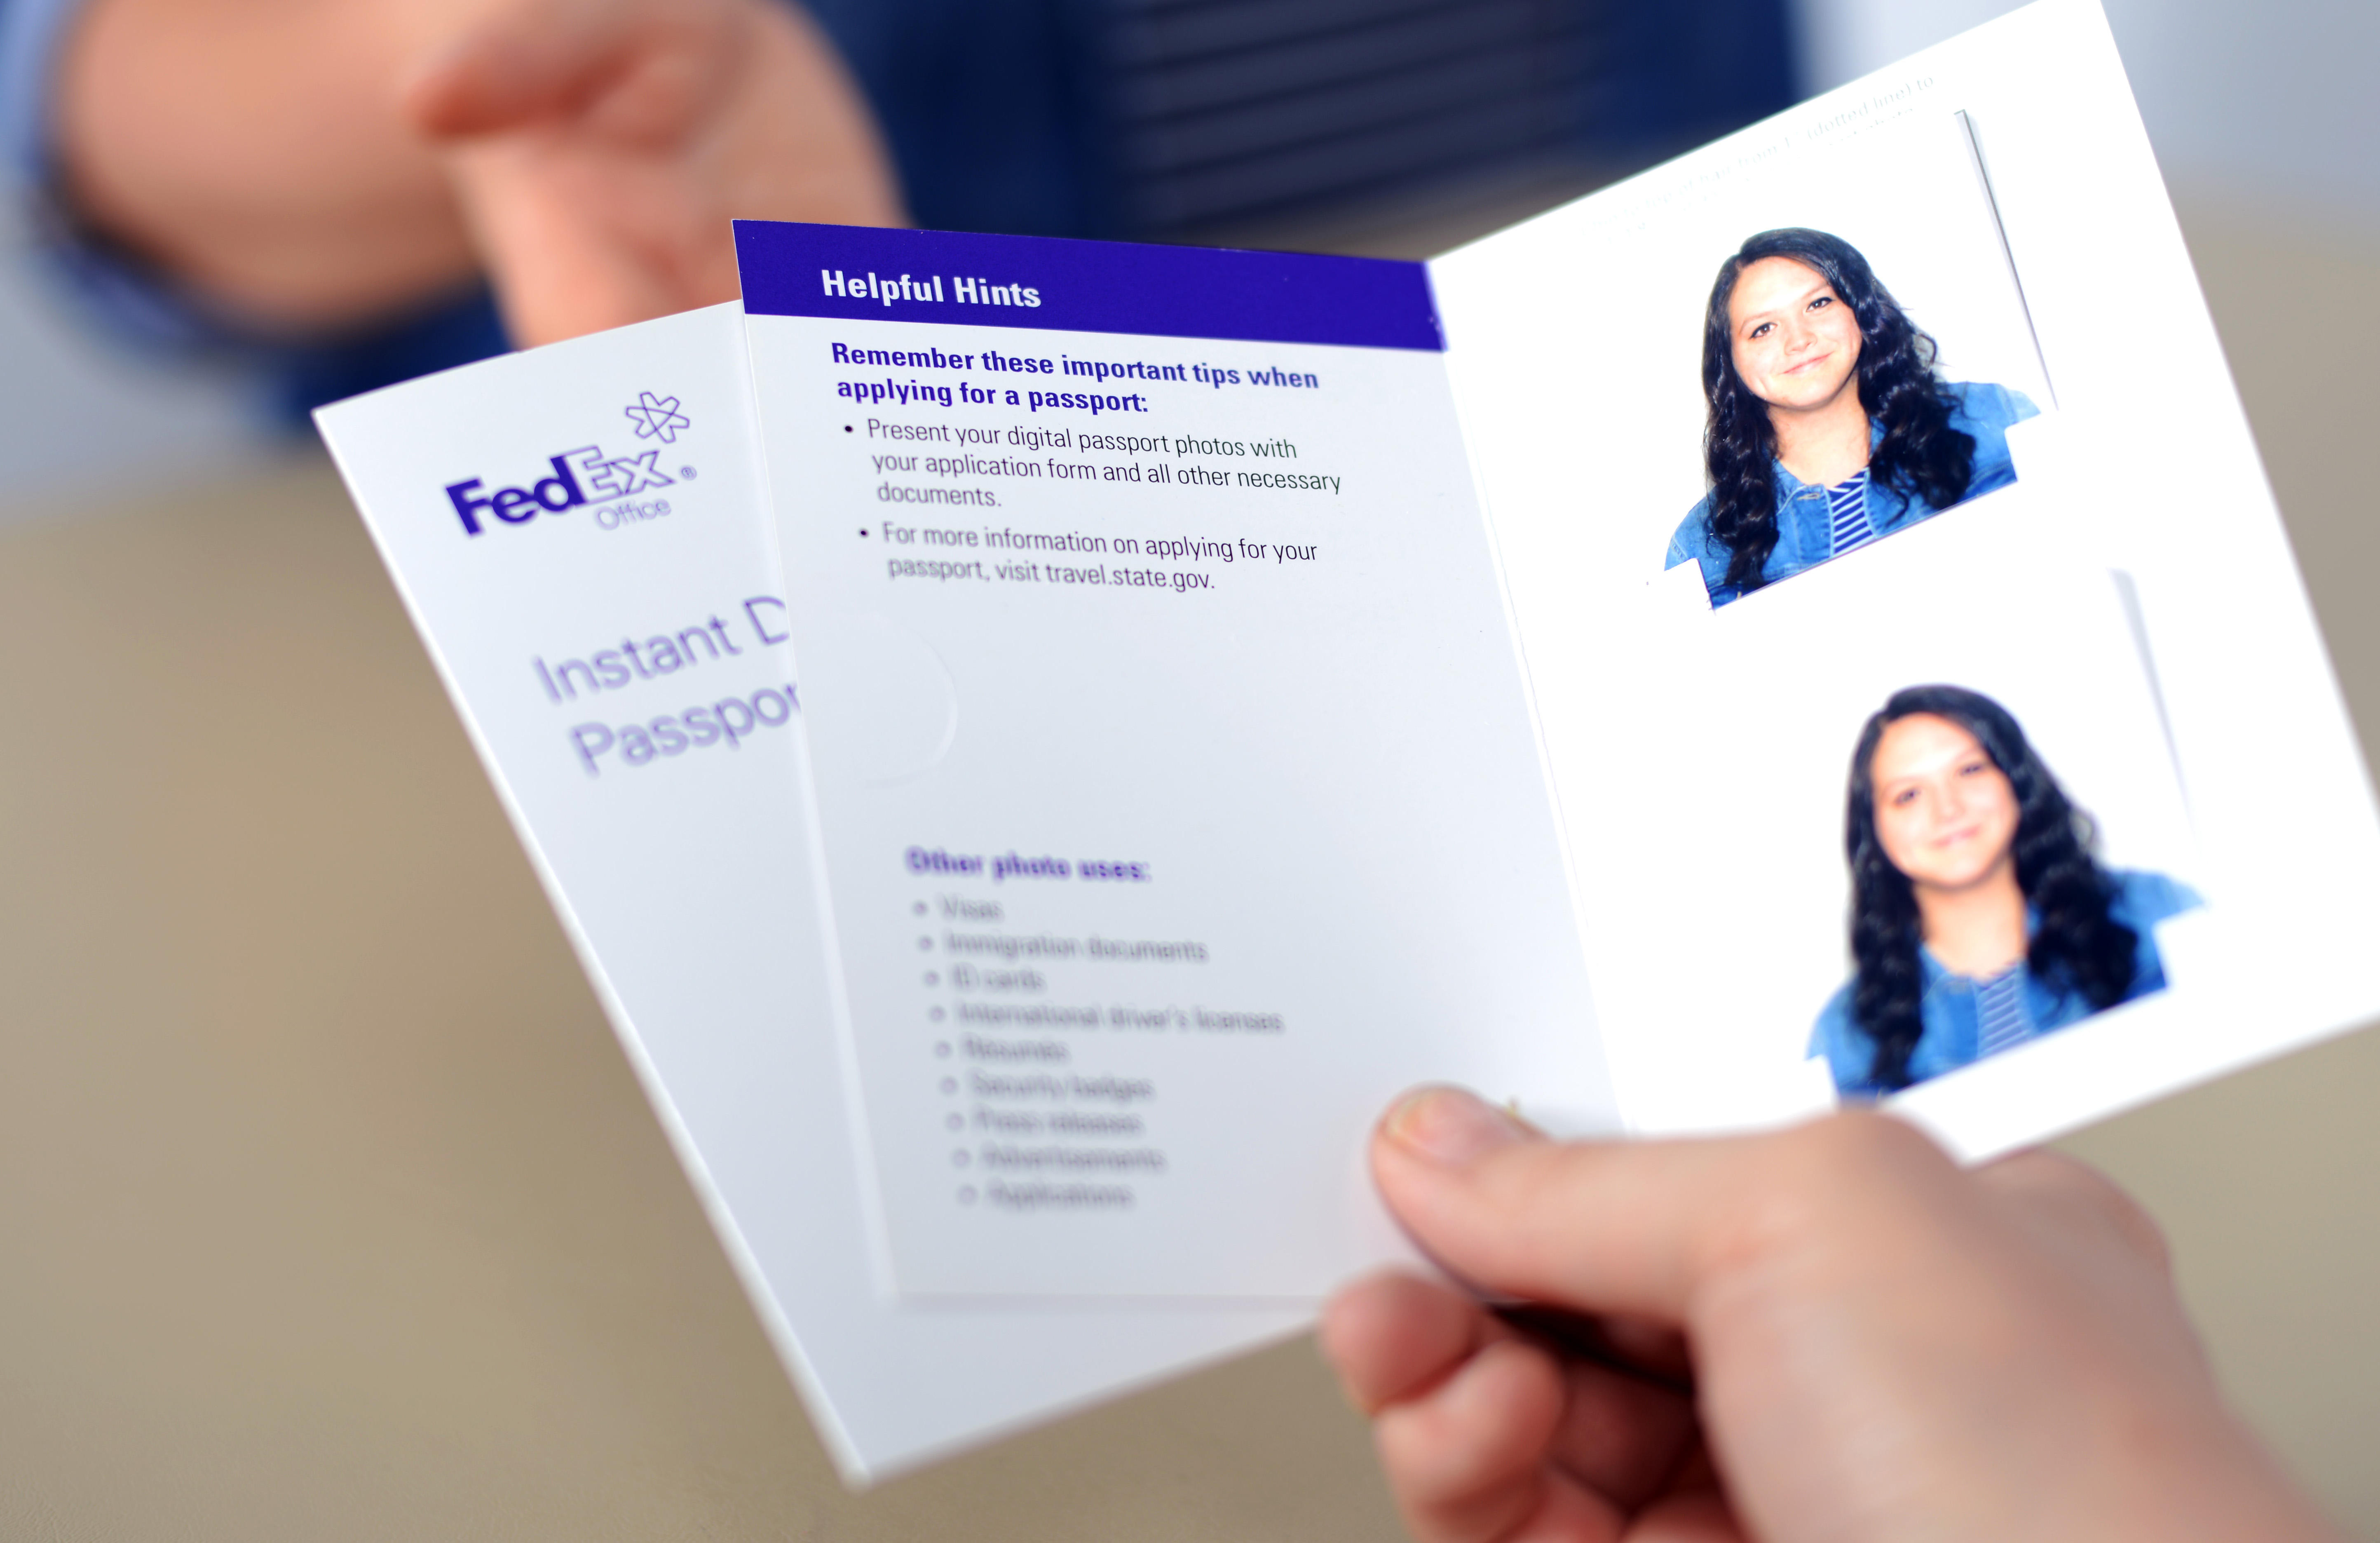 Get ready to travel with passport photos, conveniently taken and printed at a FedEx Office location near you, all for just $14.95.